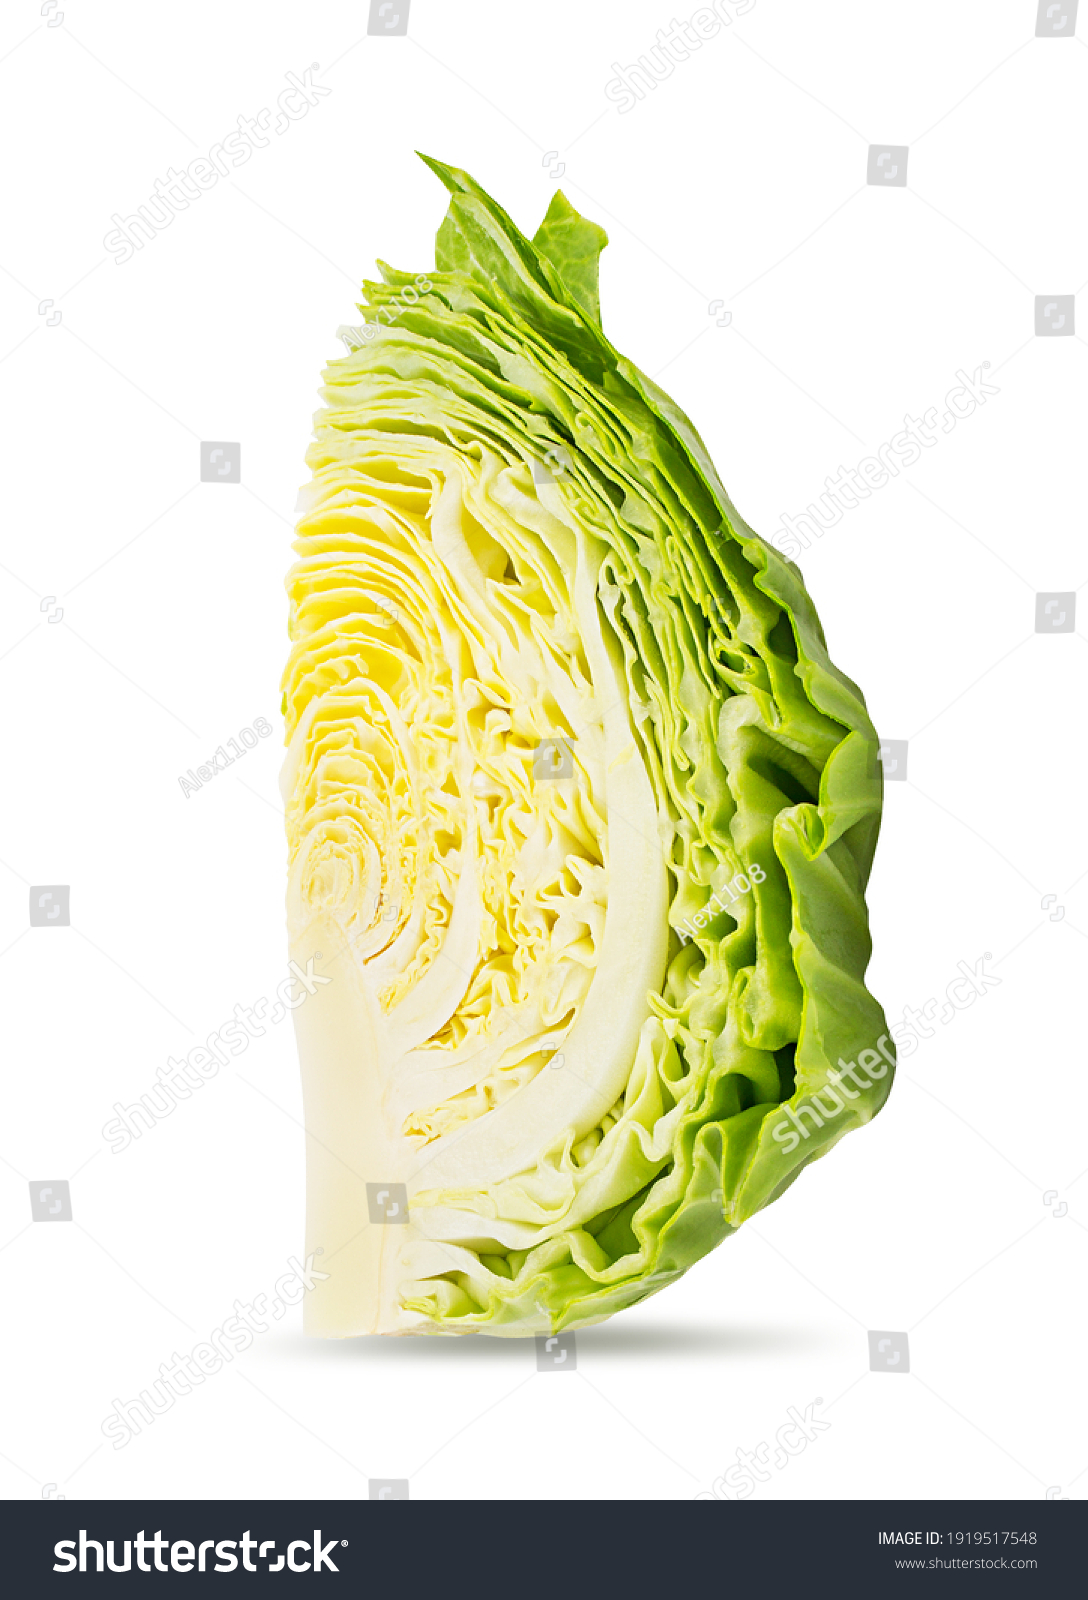 Cabbage isolated on white background with clipping path #1919517548